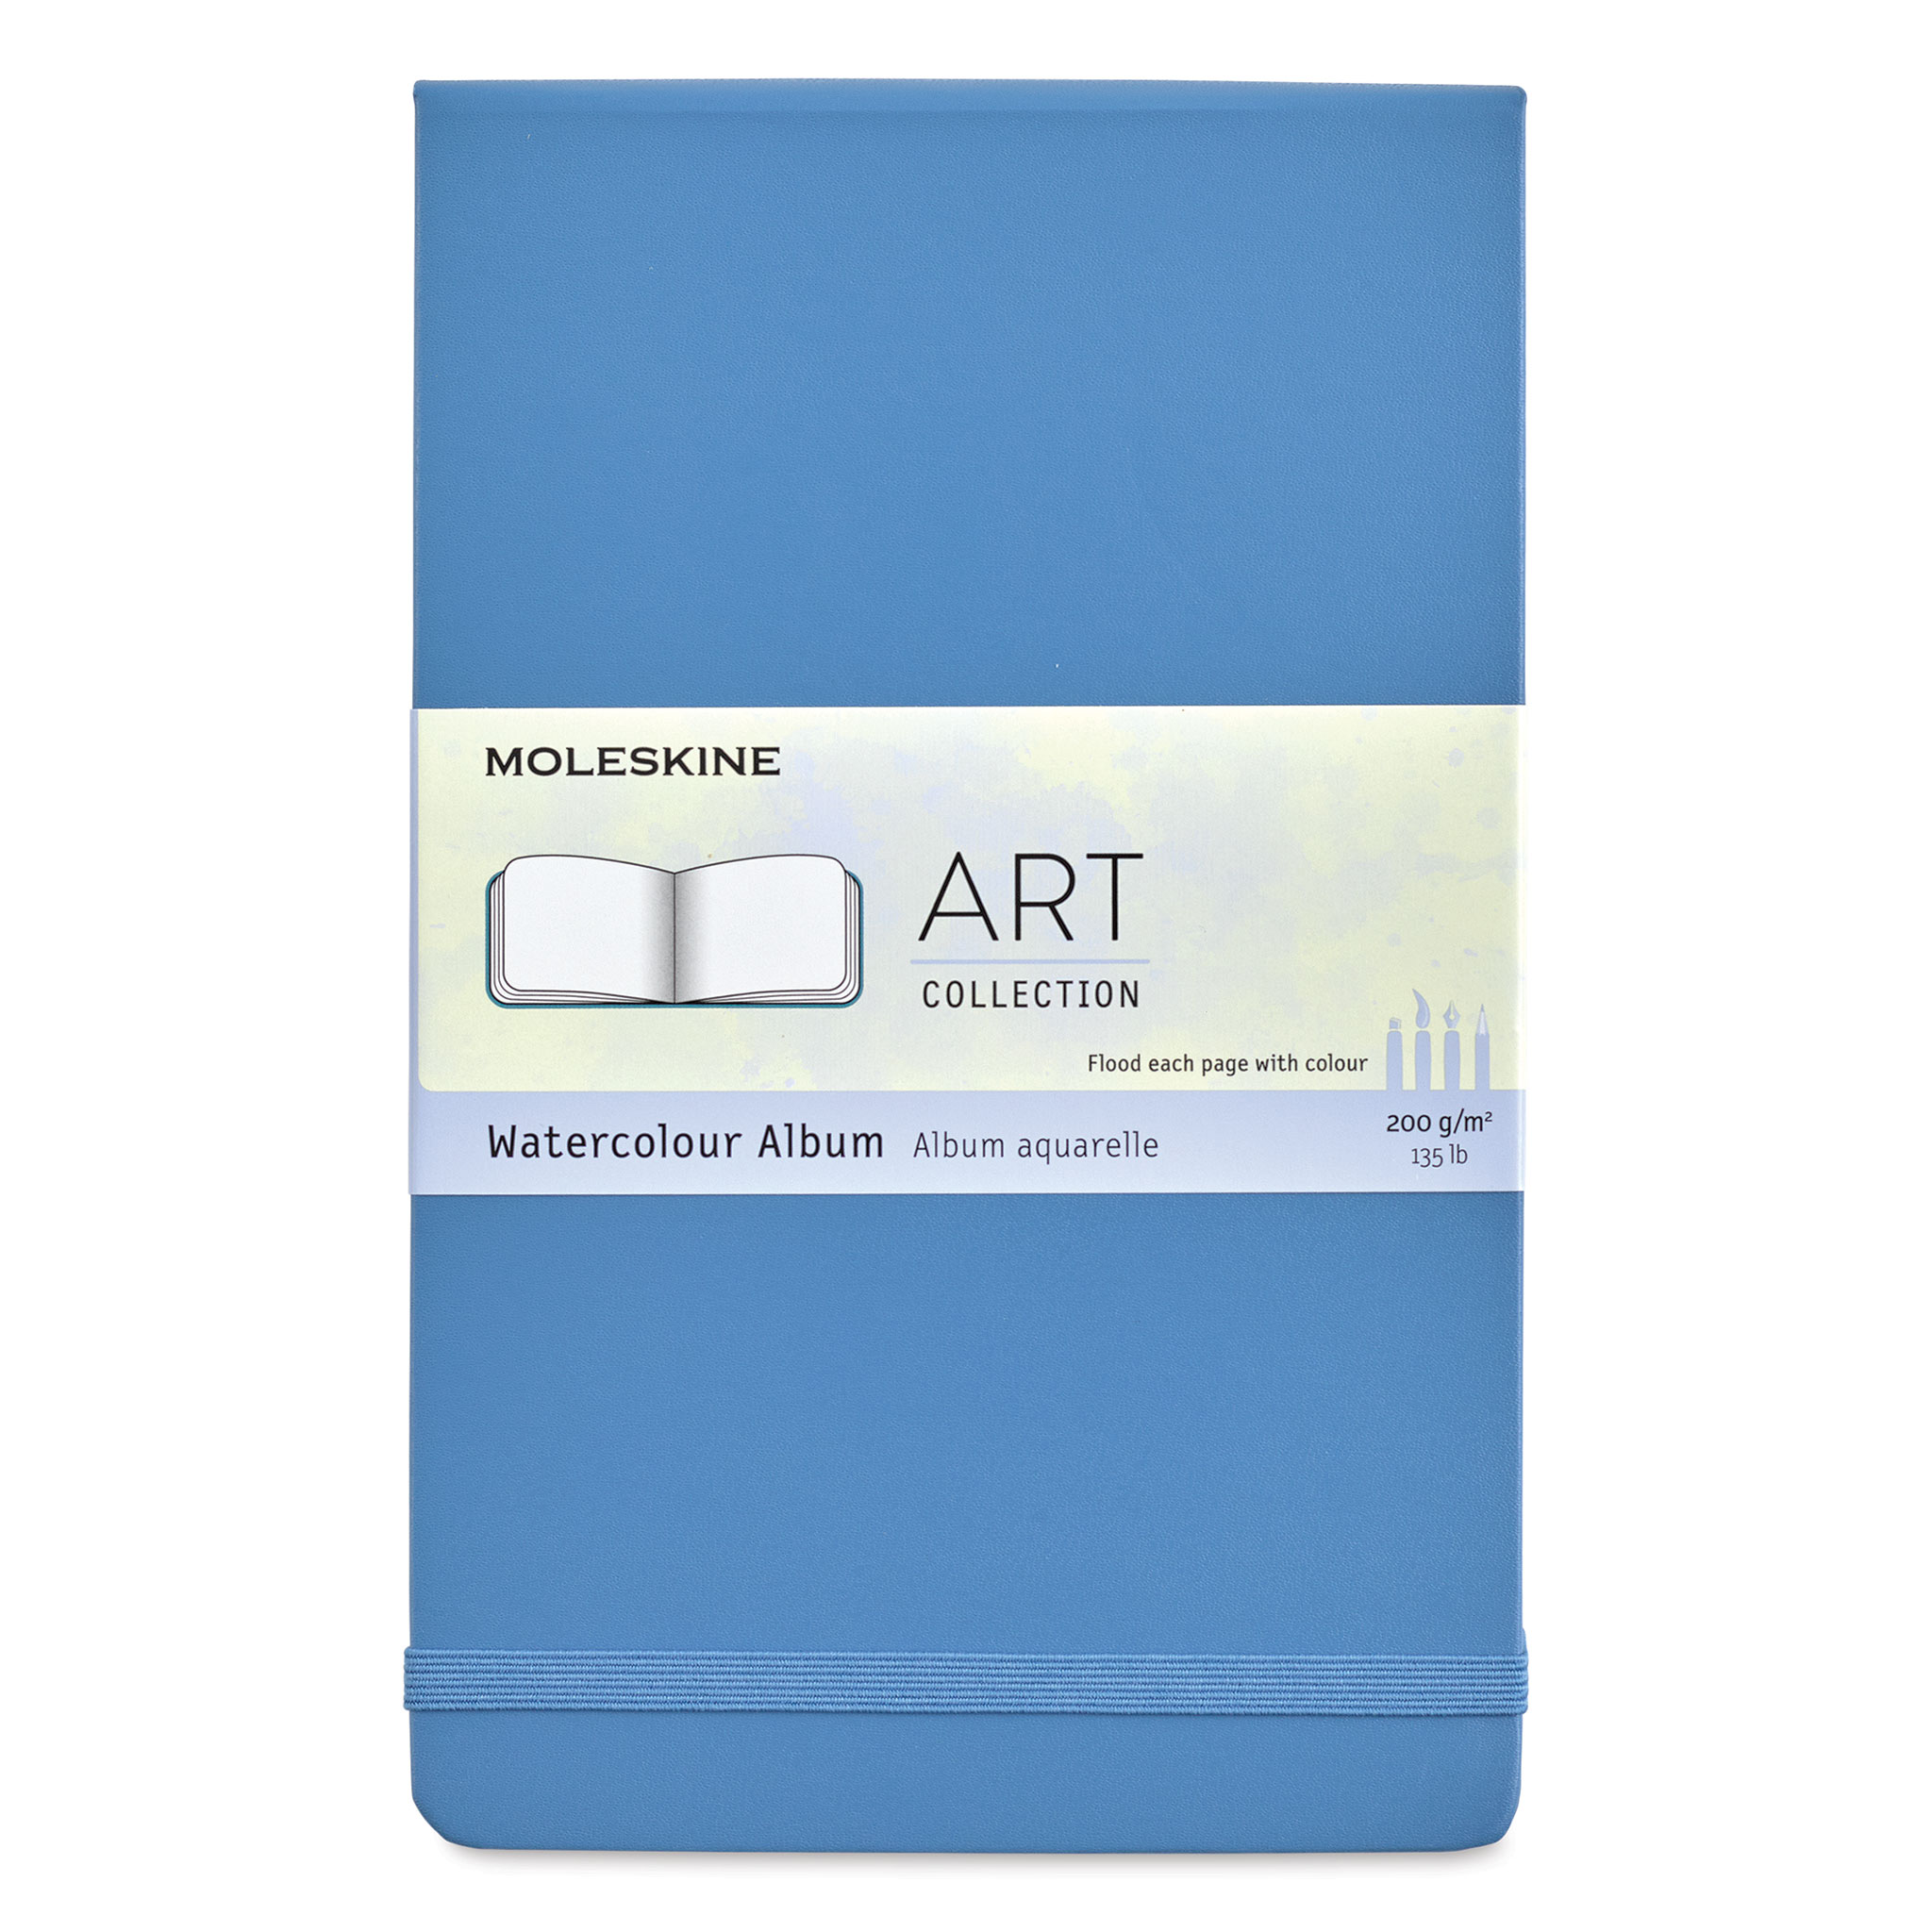 Strathmore 400 Series Watercolor Hardbound Art Journal 8.5x11 - Wet Paint  Artists' Materials and Framing